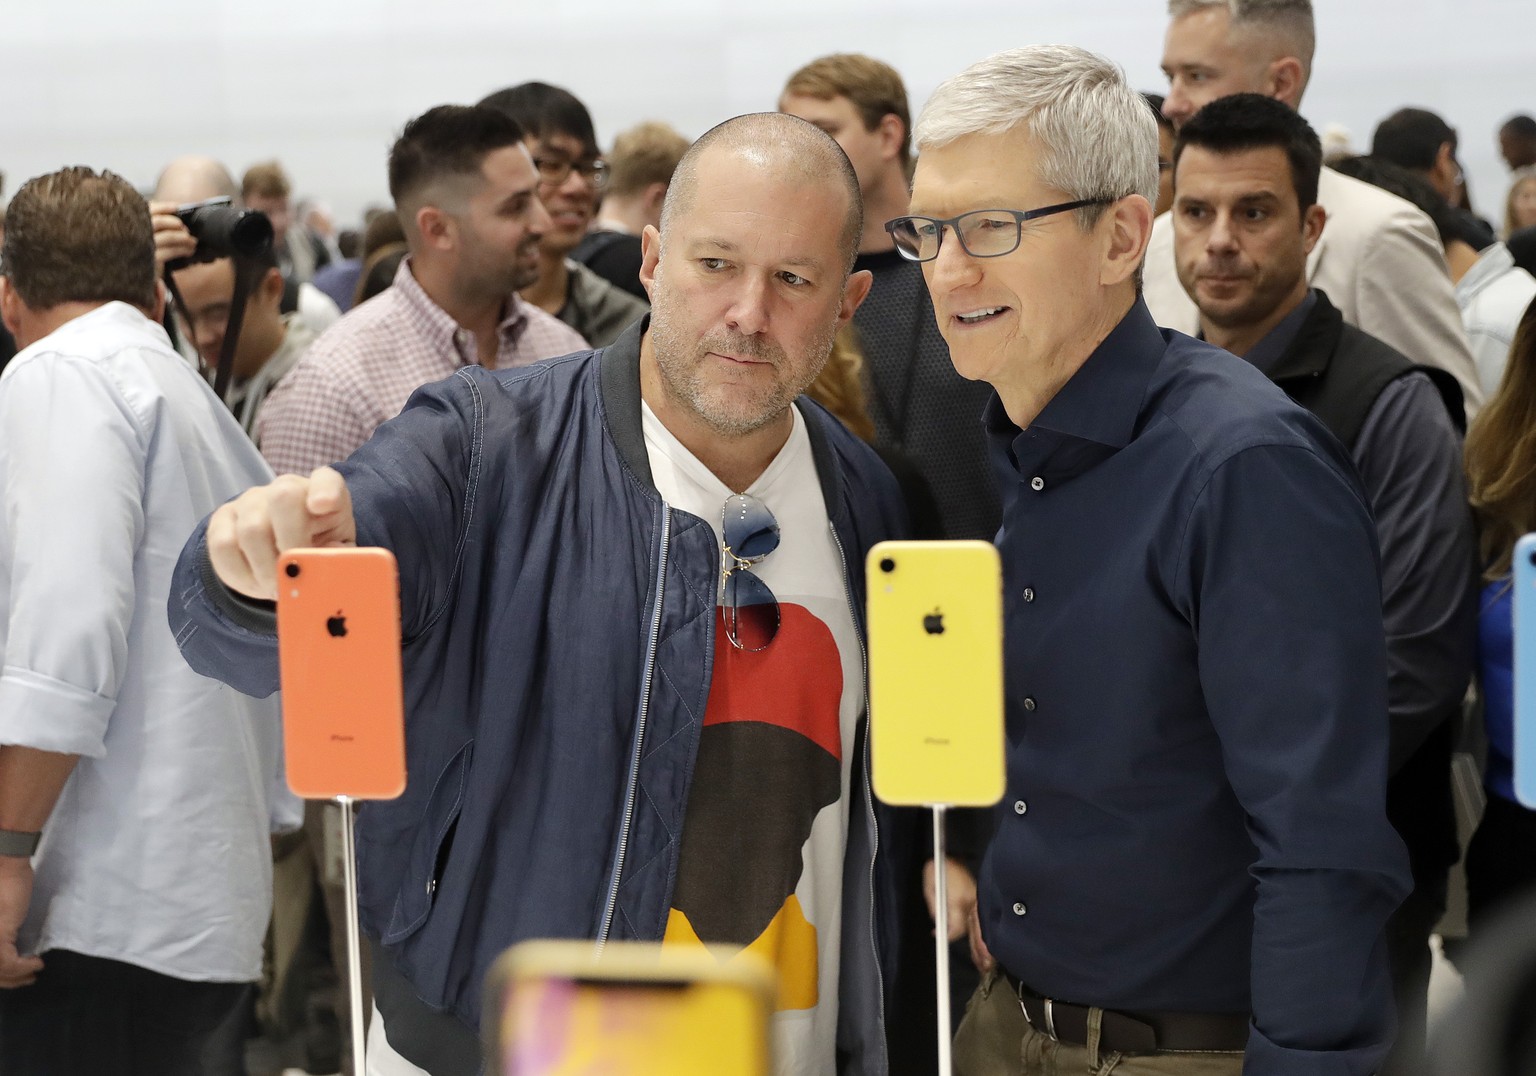 Jonathan Ive, Apple&#039;s chief design officer, left, looks at some new iPhone models with CEO Tim Cook during an event to announce new products Wednesday, Sept. 12, 2018, in Cupertino, Calif. (AP Ph ...